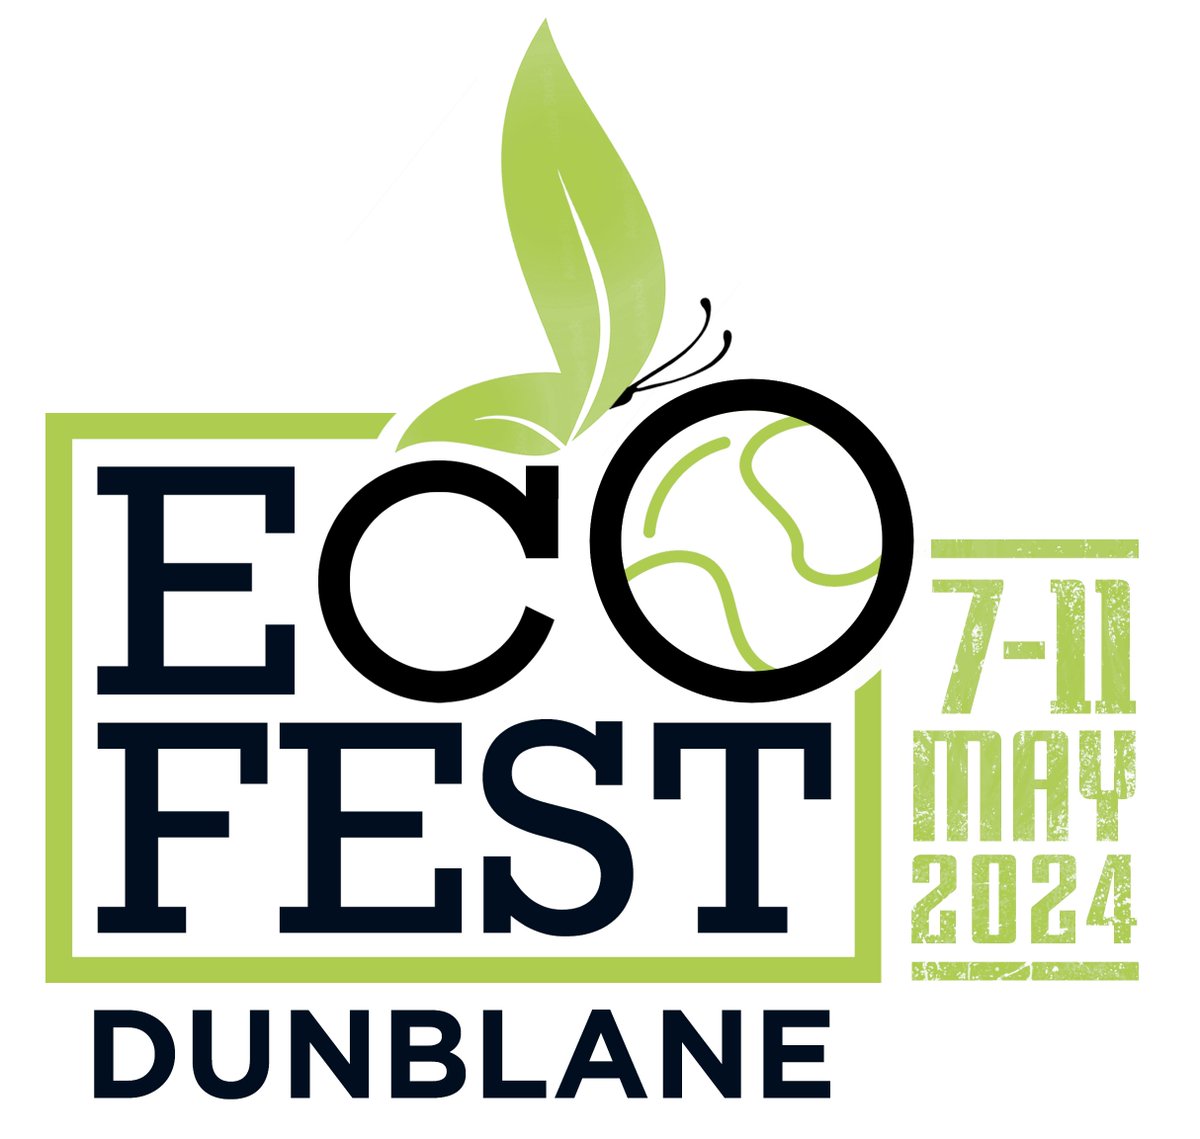 I will be speaking at the Dunblane Centre on Wednesday 8th May, 7pm on my experience of 'Going All Electric' - heat pump, solar pv, battery, EV and smart meter.  Free.
@dunblaneinfo @DunblaneTweets @DunblaneCentre2 @DunblanePrimary @NewtonPrimary01 @DunblaneCC @DTDunblaneHydro